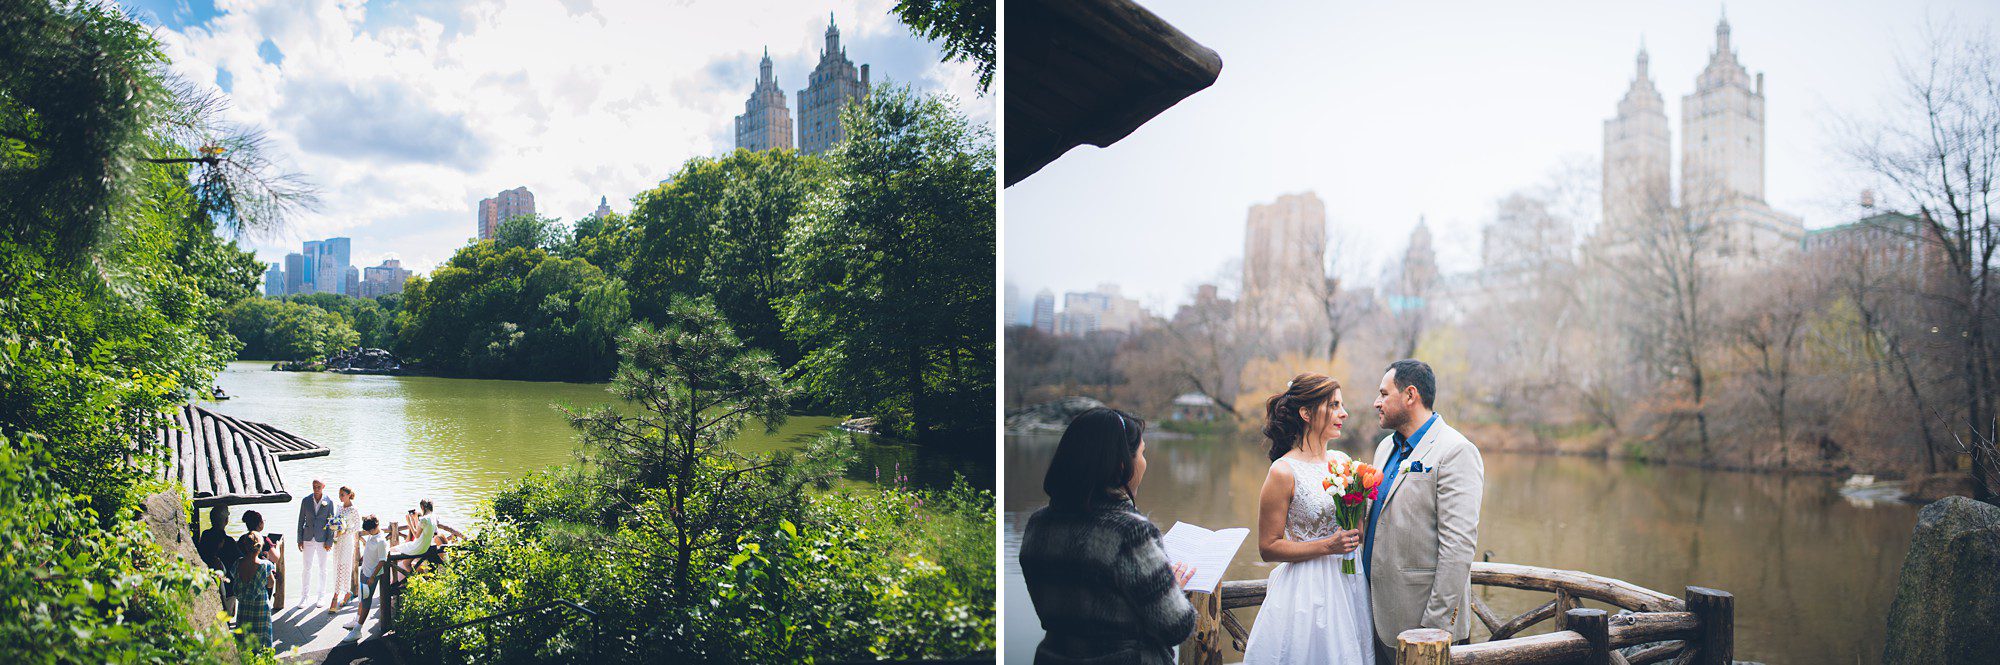 Chambers Landing Top wedding spots in Central Park